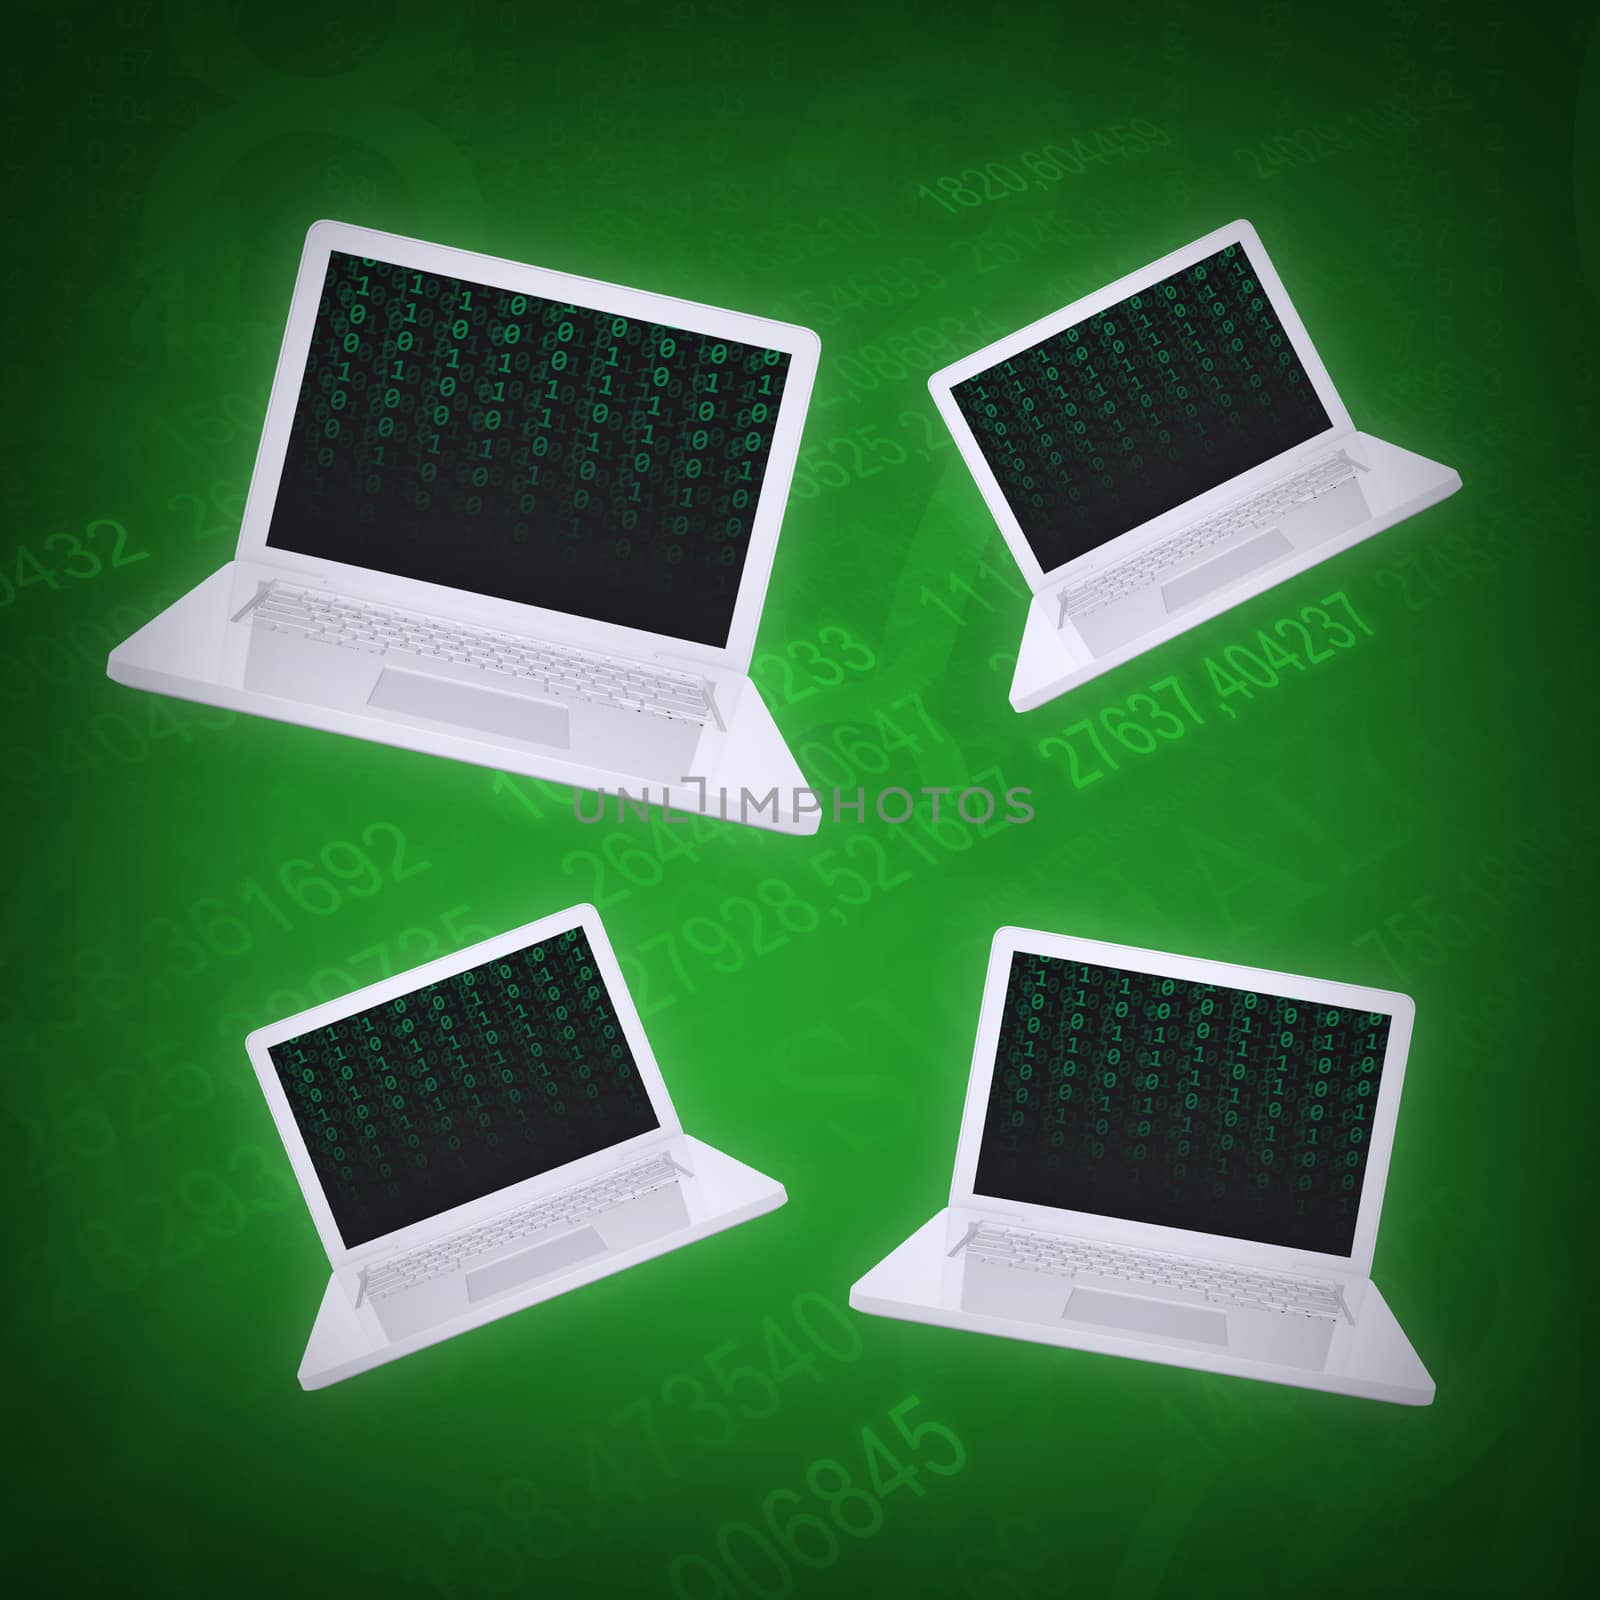 Four laptop on an abstract background. The concept of computers